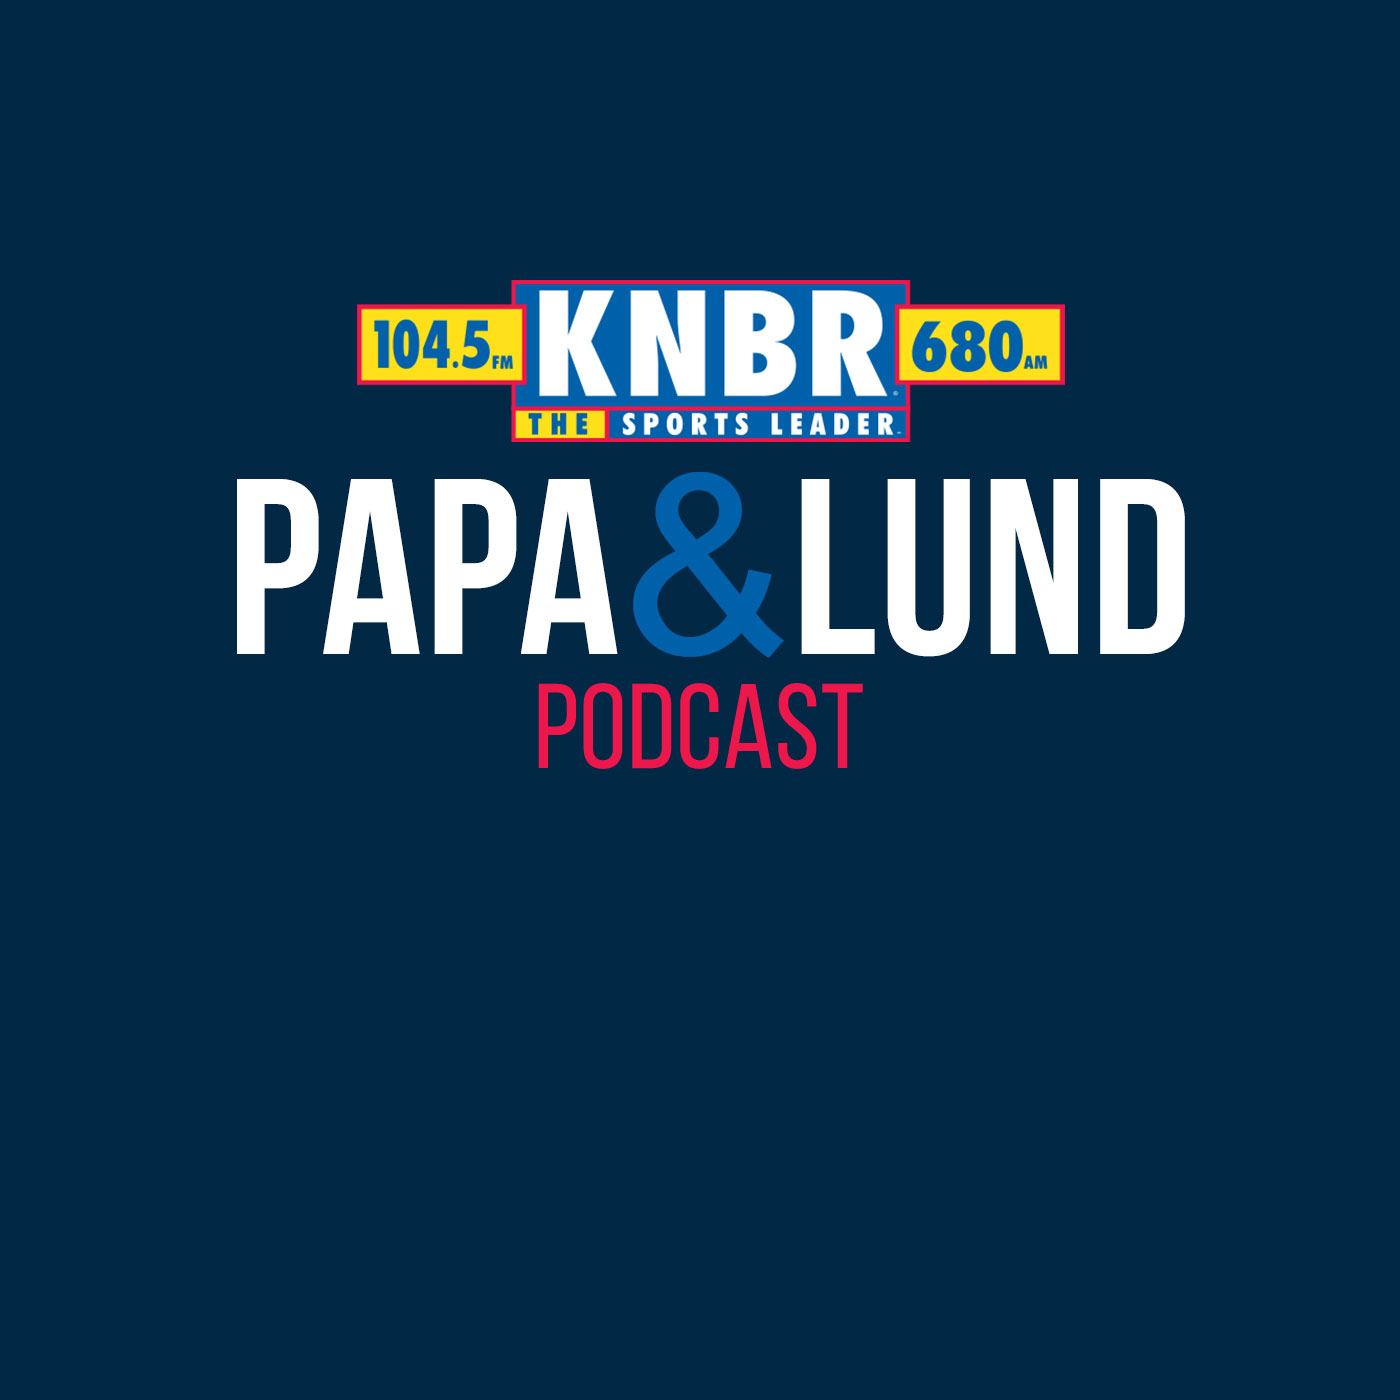 6-23 Joc Pederson joins Papa & Lund to discuss the recent hot streak of the Giants heading into a huge series against the Dbacks